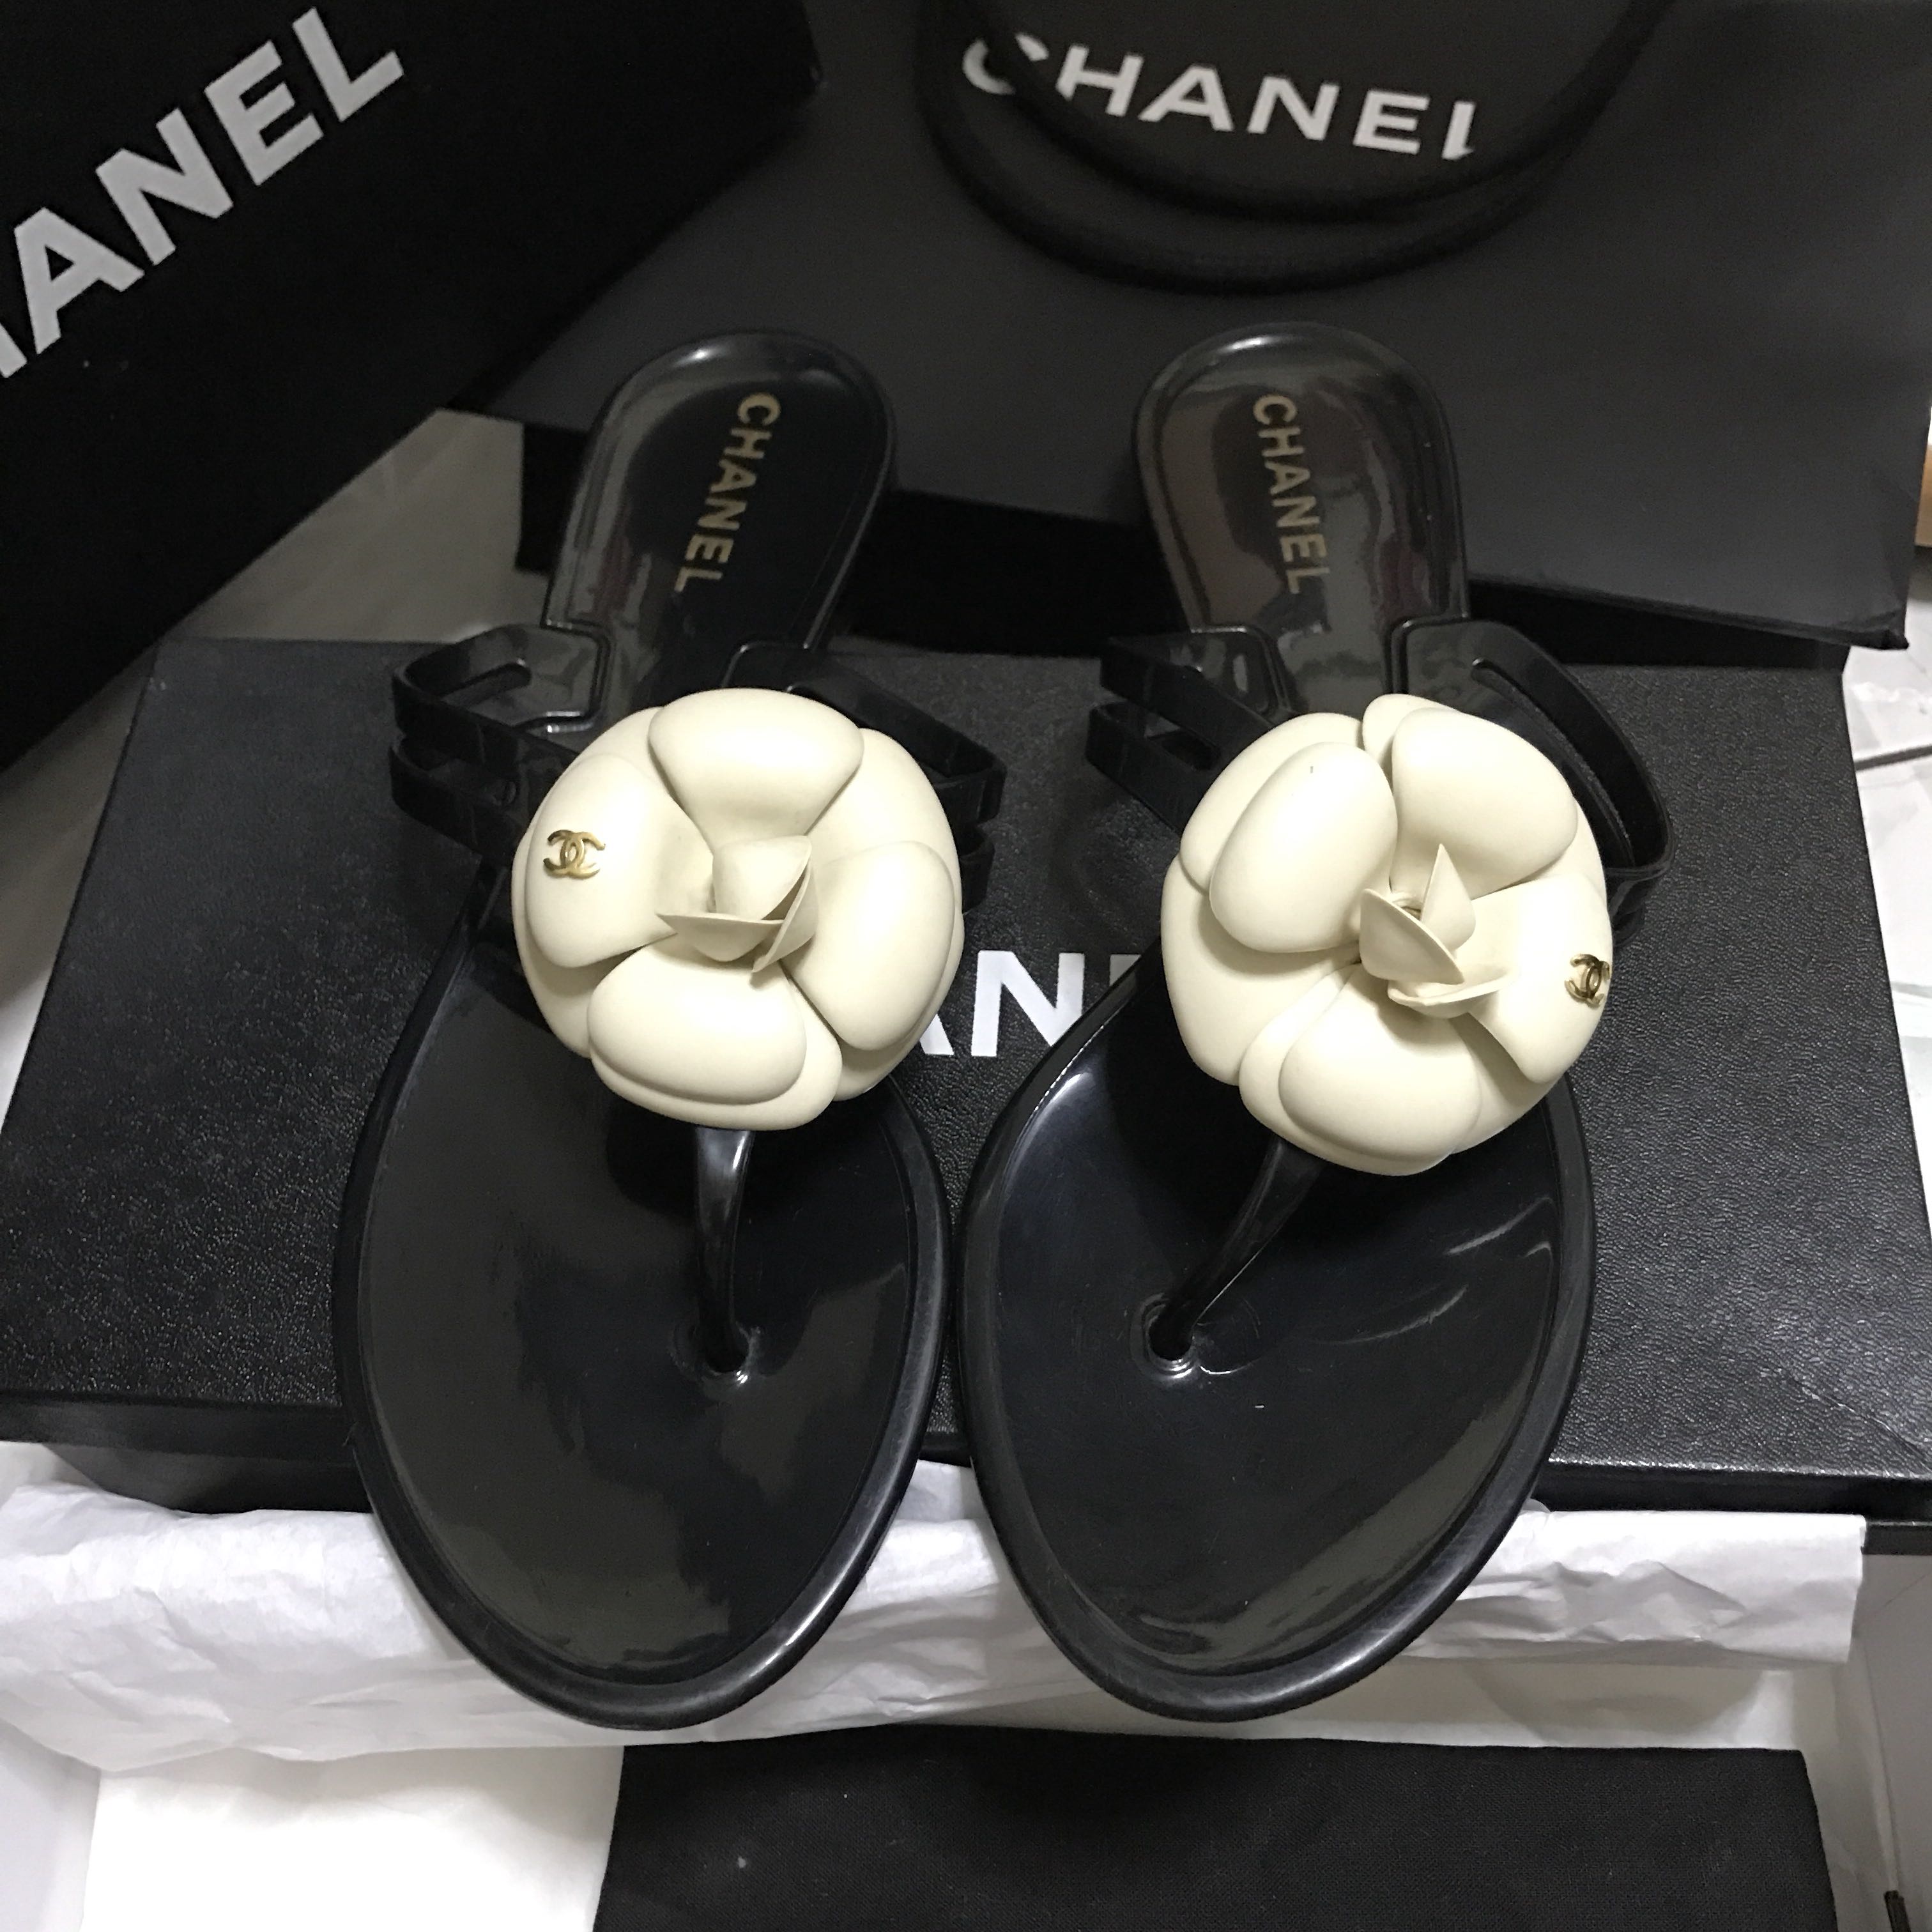 jelly chanel sandals